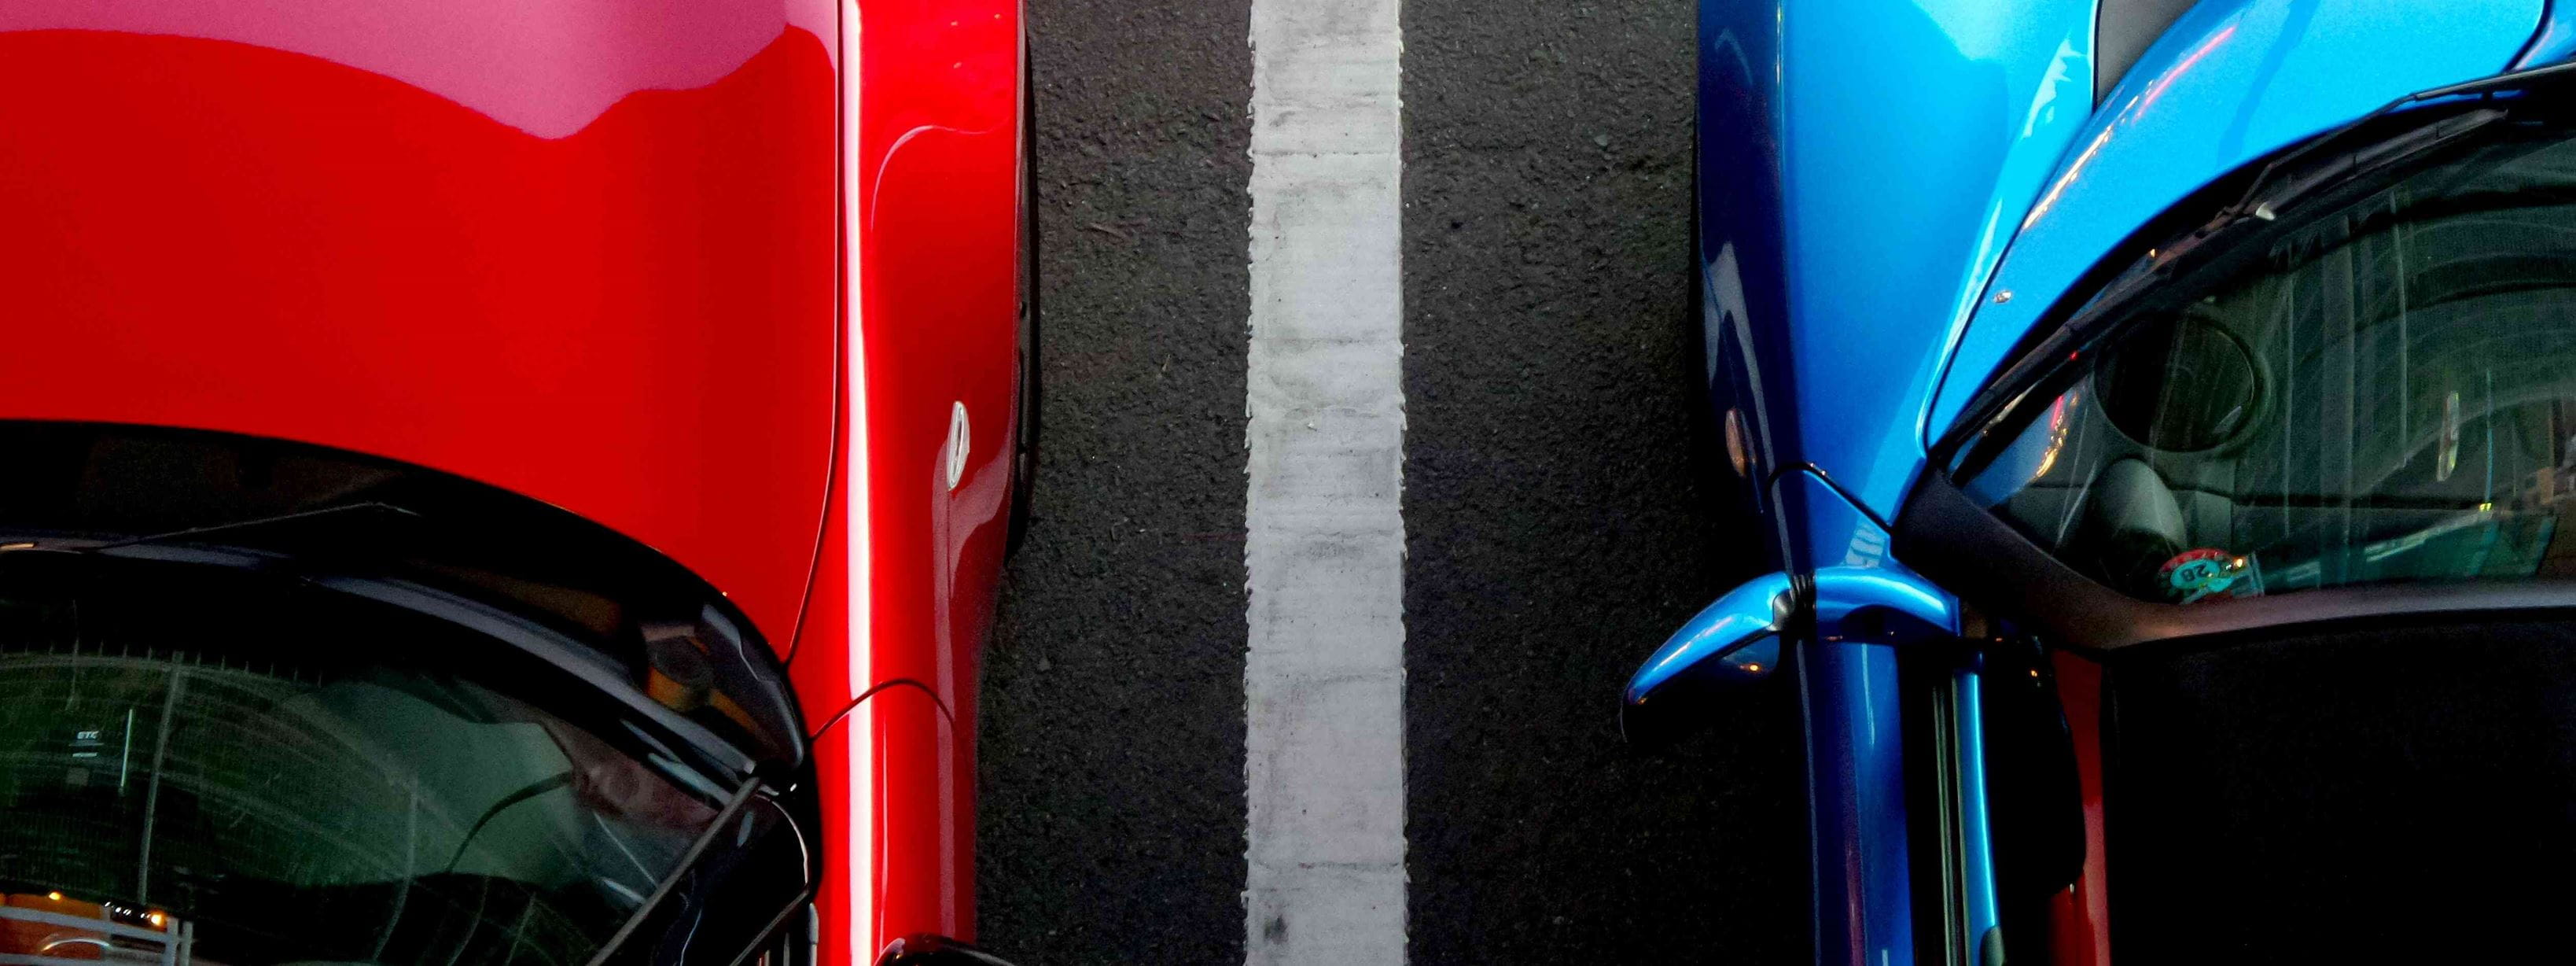 Two cars - red and blue